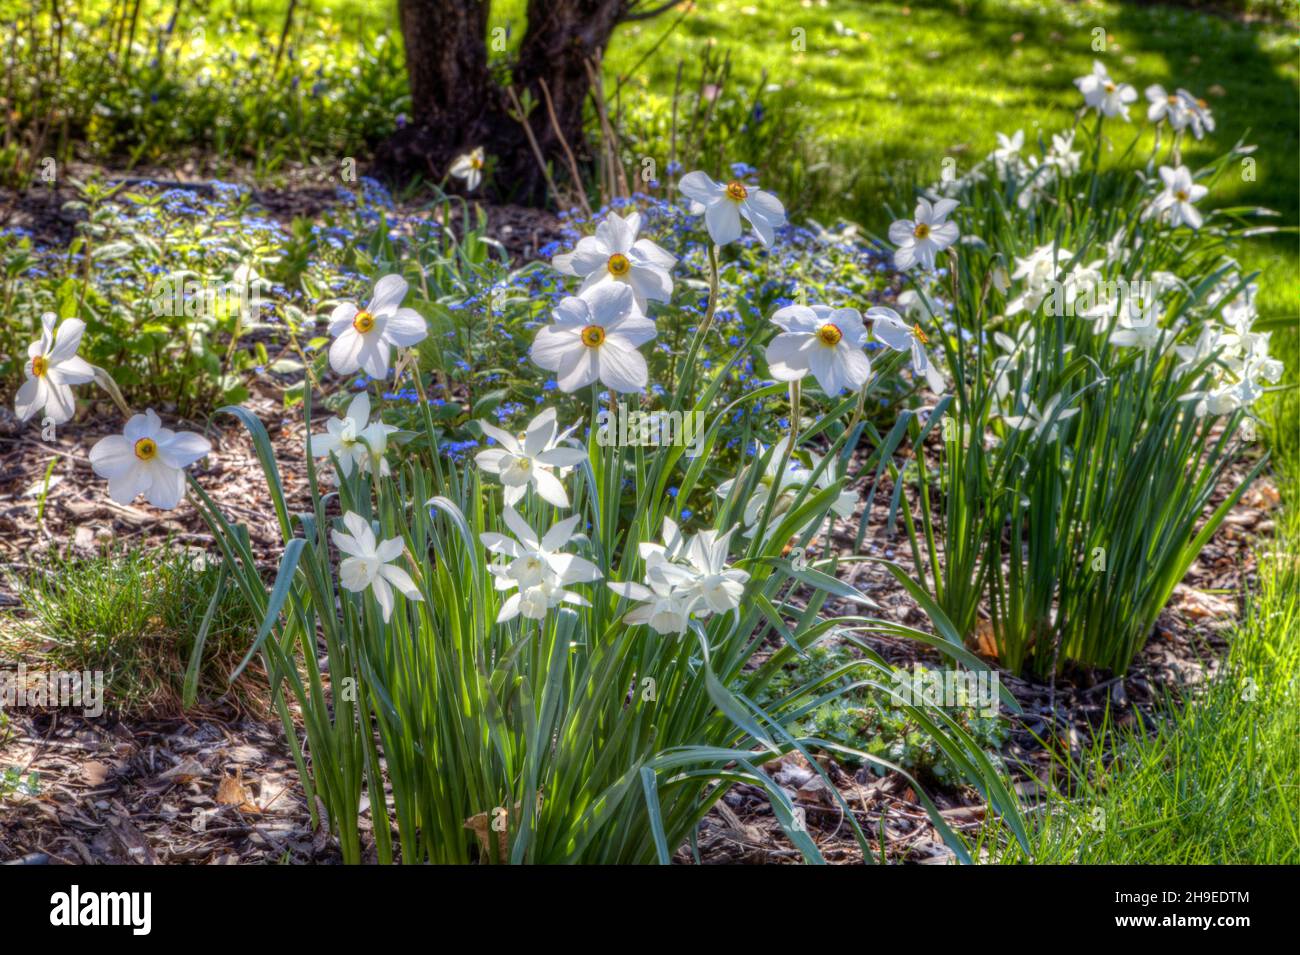 White flowered daffodils fully in flower decorate the edge of a bed in a partial shade garden. Stock Photo